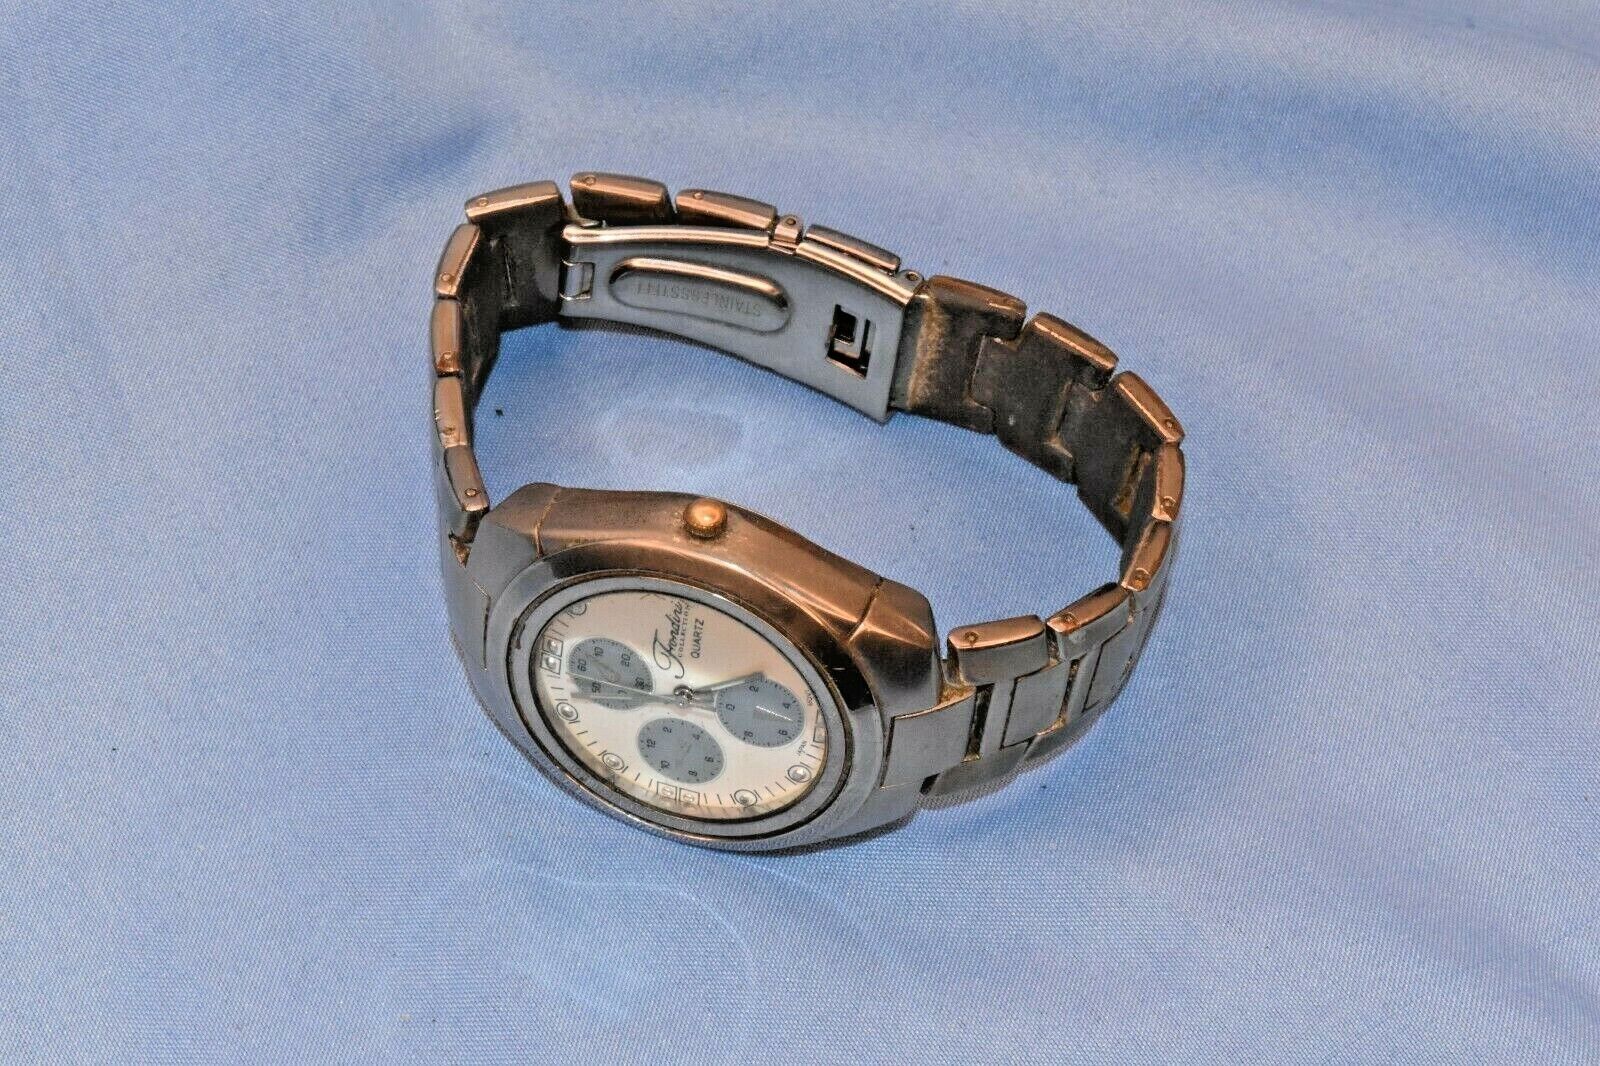 Early Chinese Mens 49mm Fondini Watch - Japan Movt - New Battery - Working 